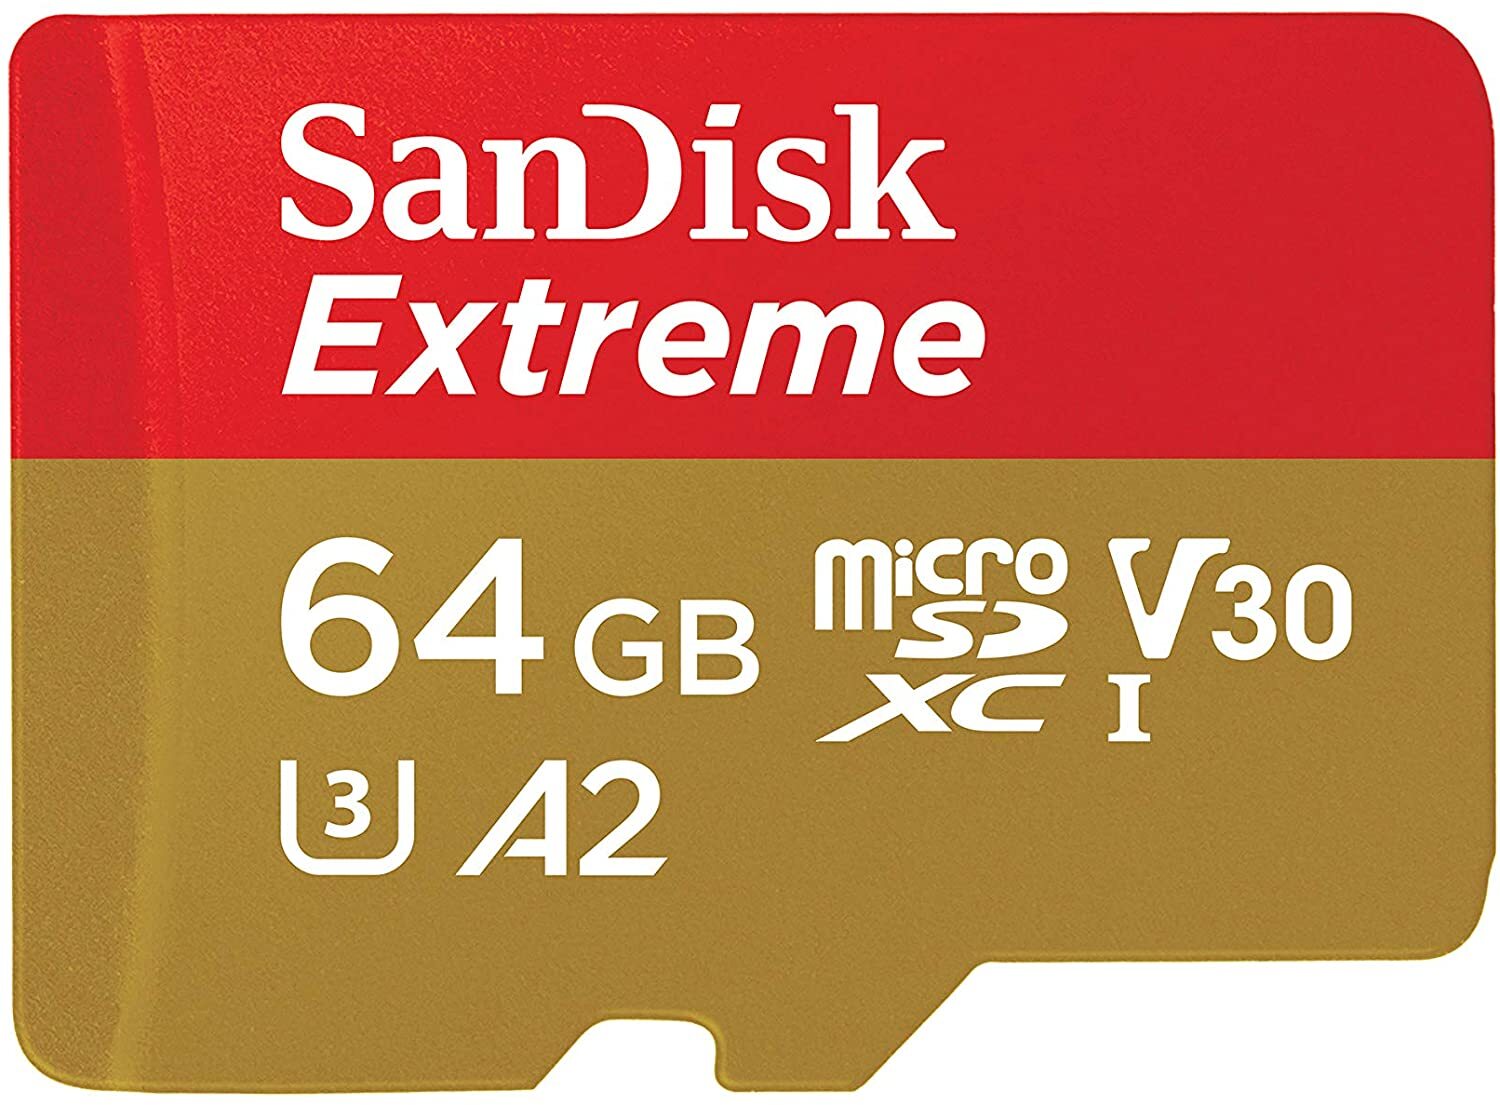 SanDisk Extreme 64GB Micro SD Card